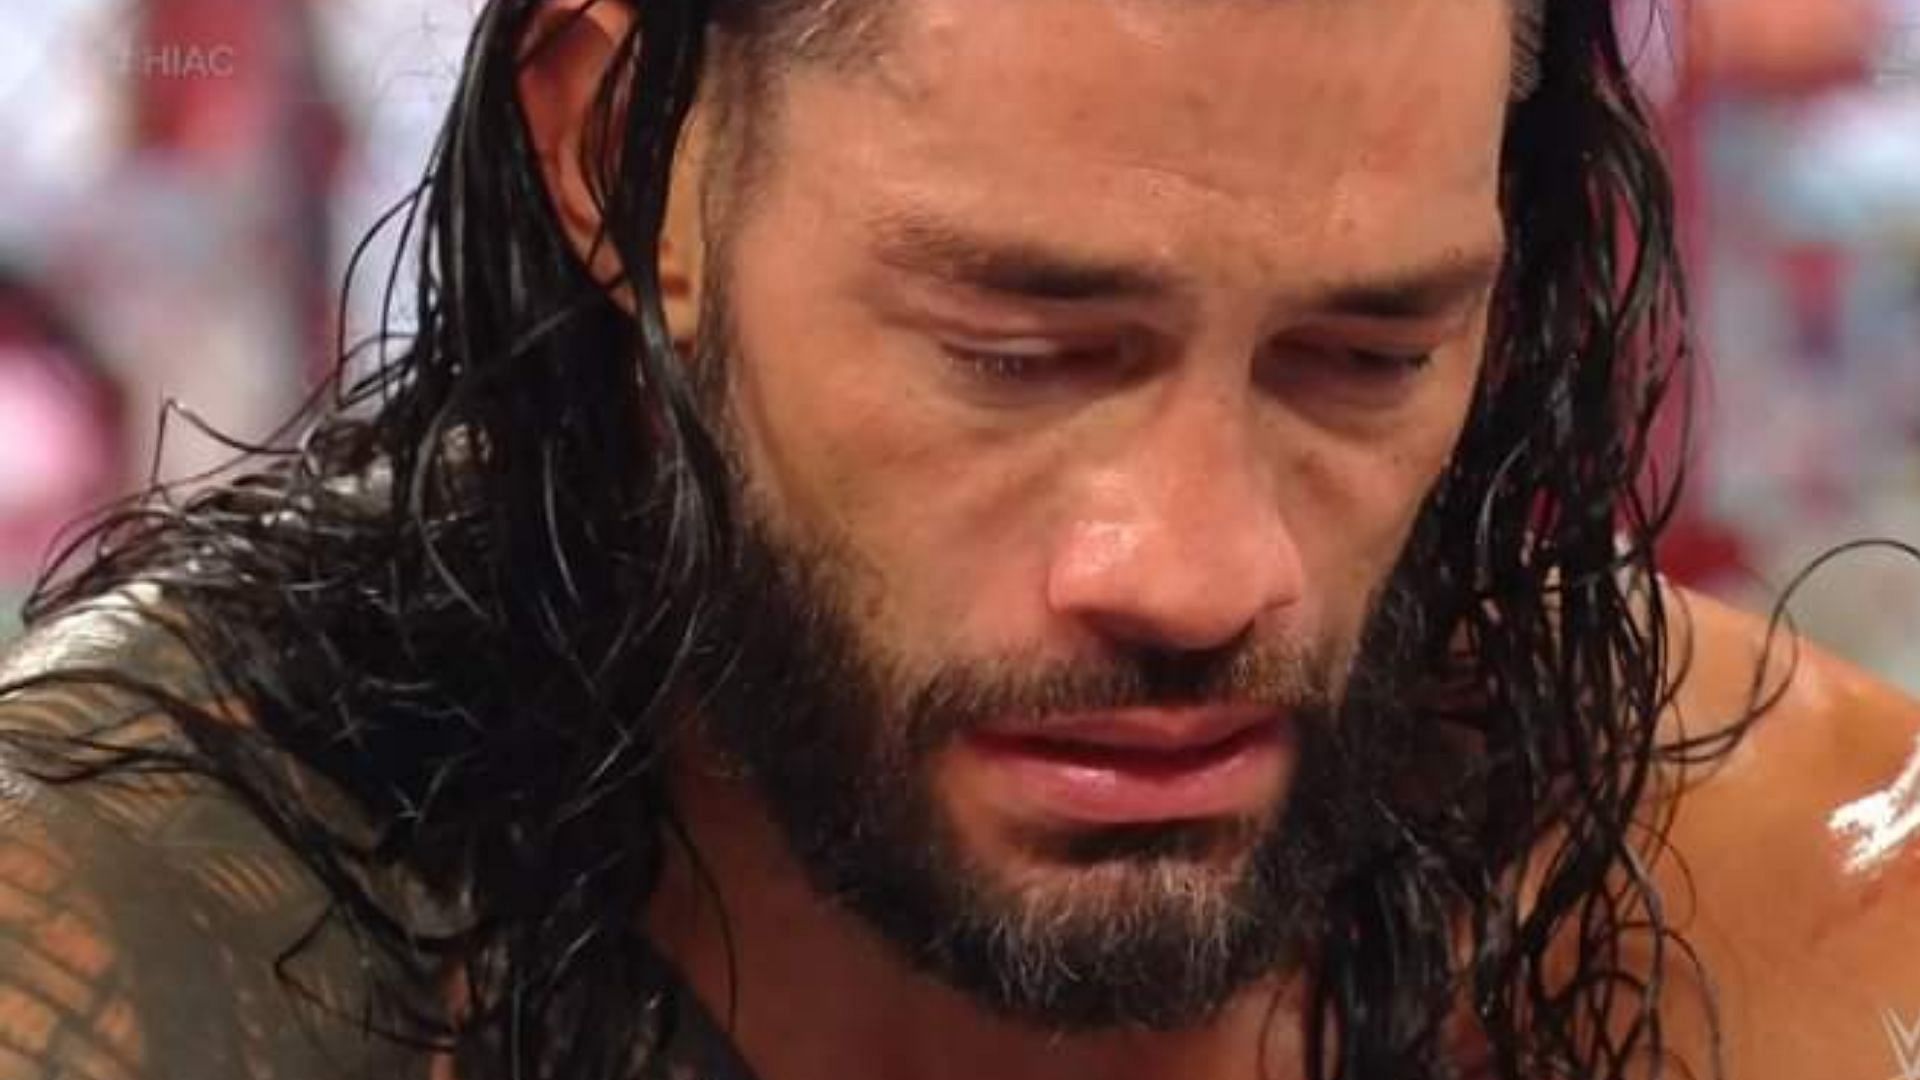 Roman Reigns has been in a dominant position for some time